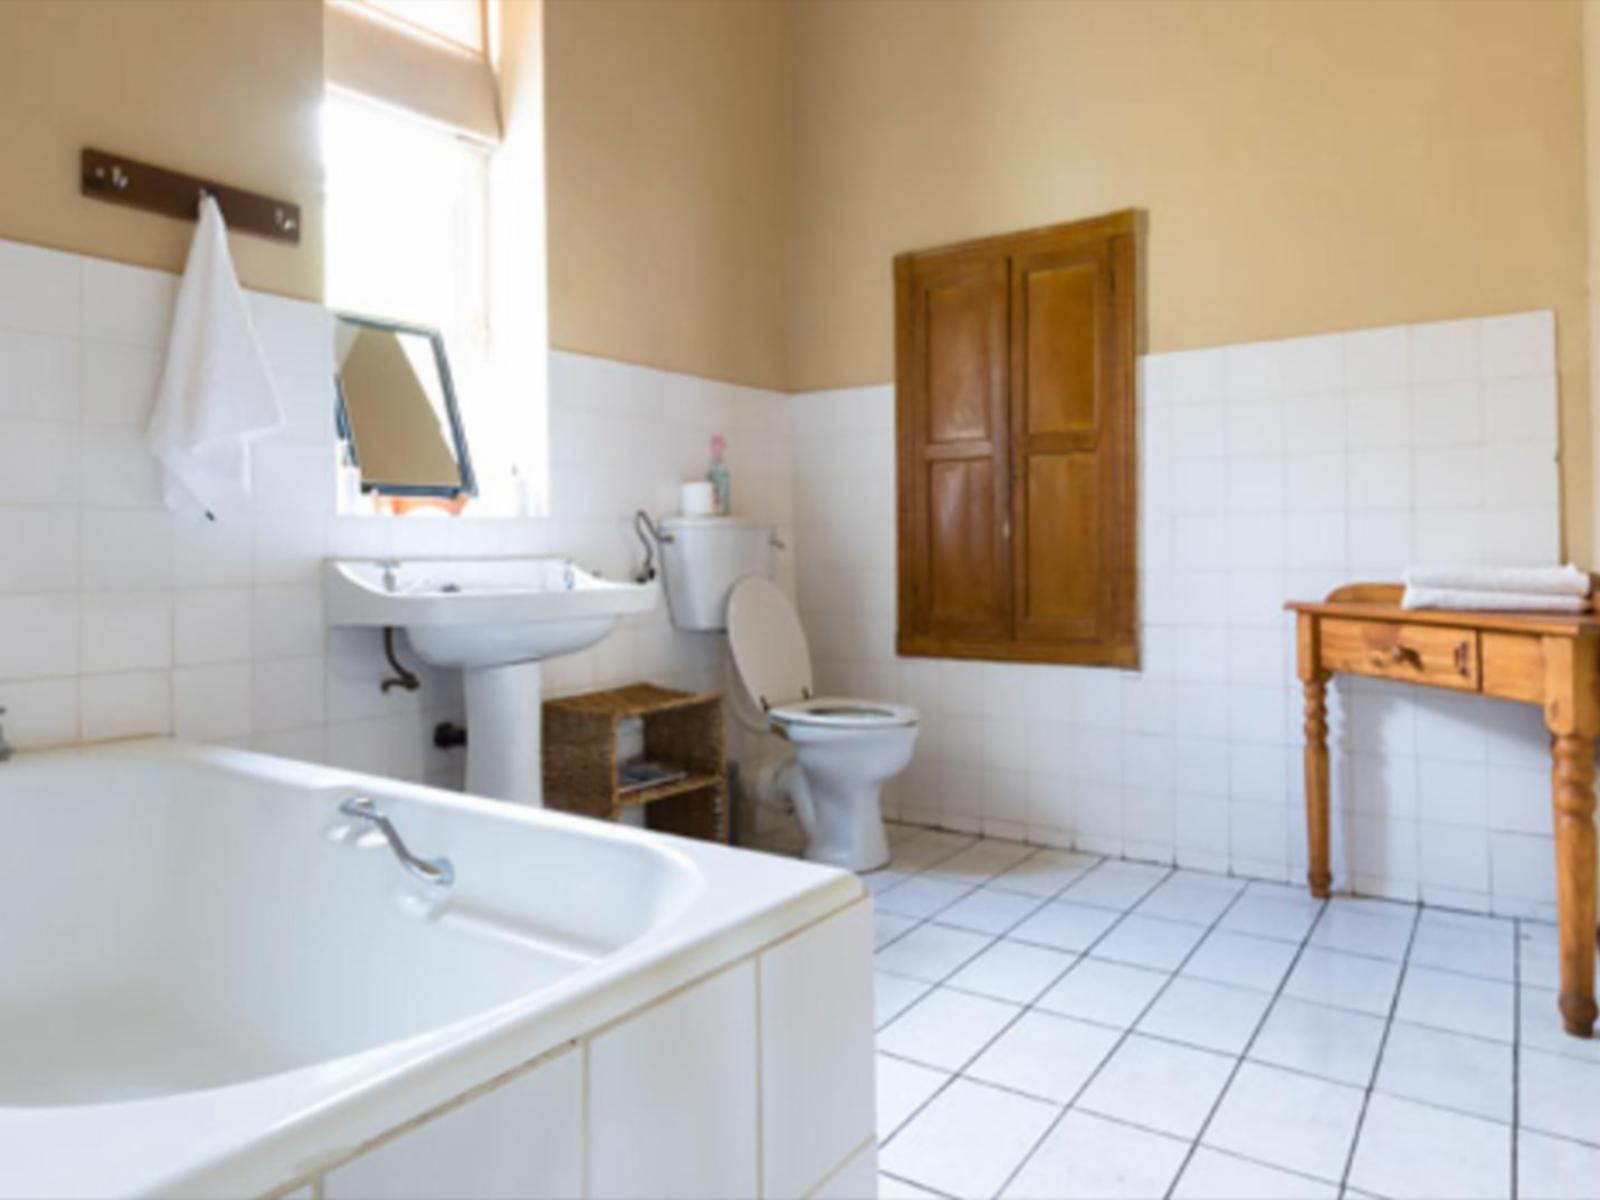 Nanna Rous Town House Colesberg Northern Cape South Africa Bathroom